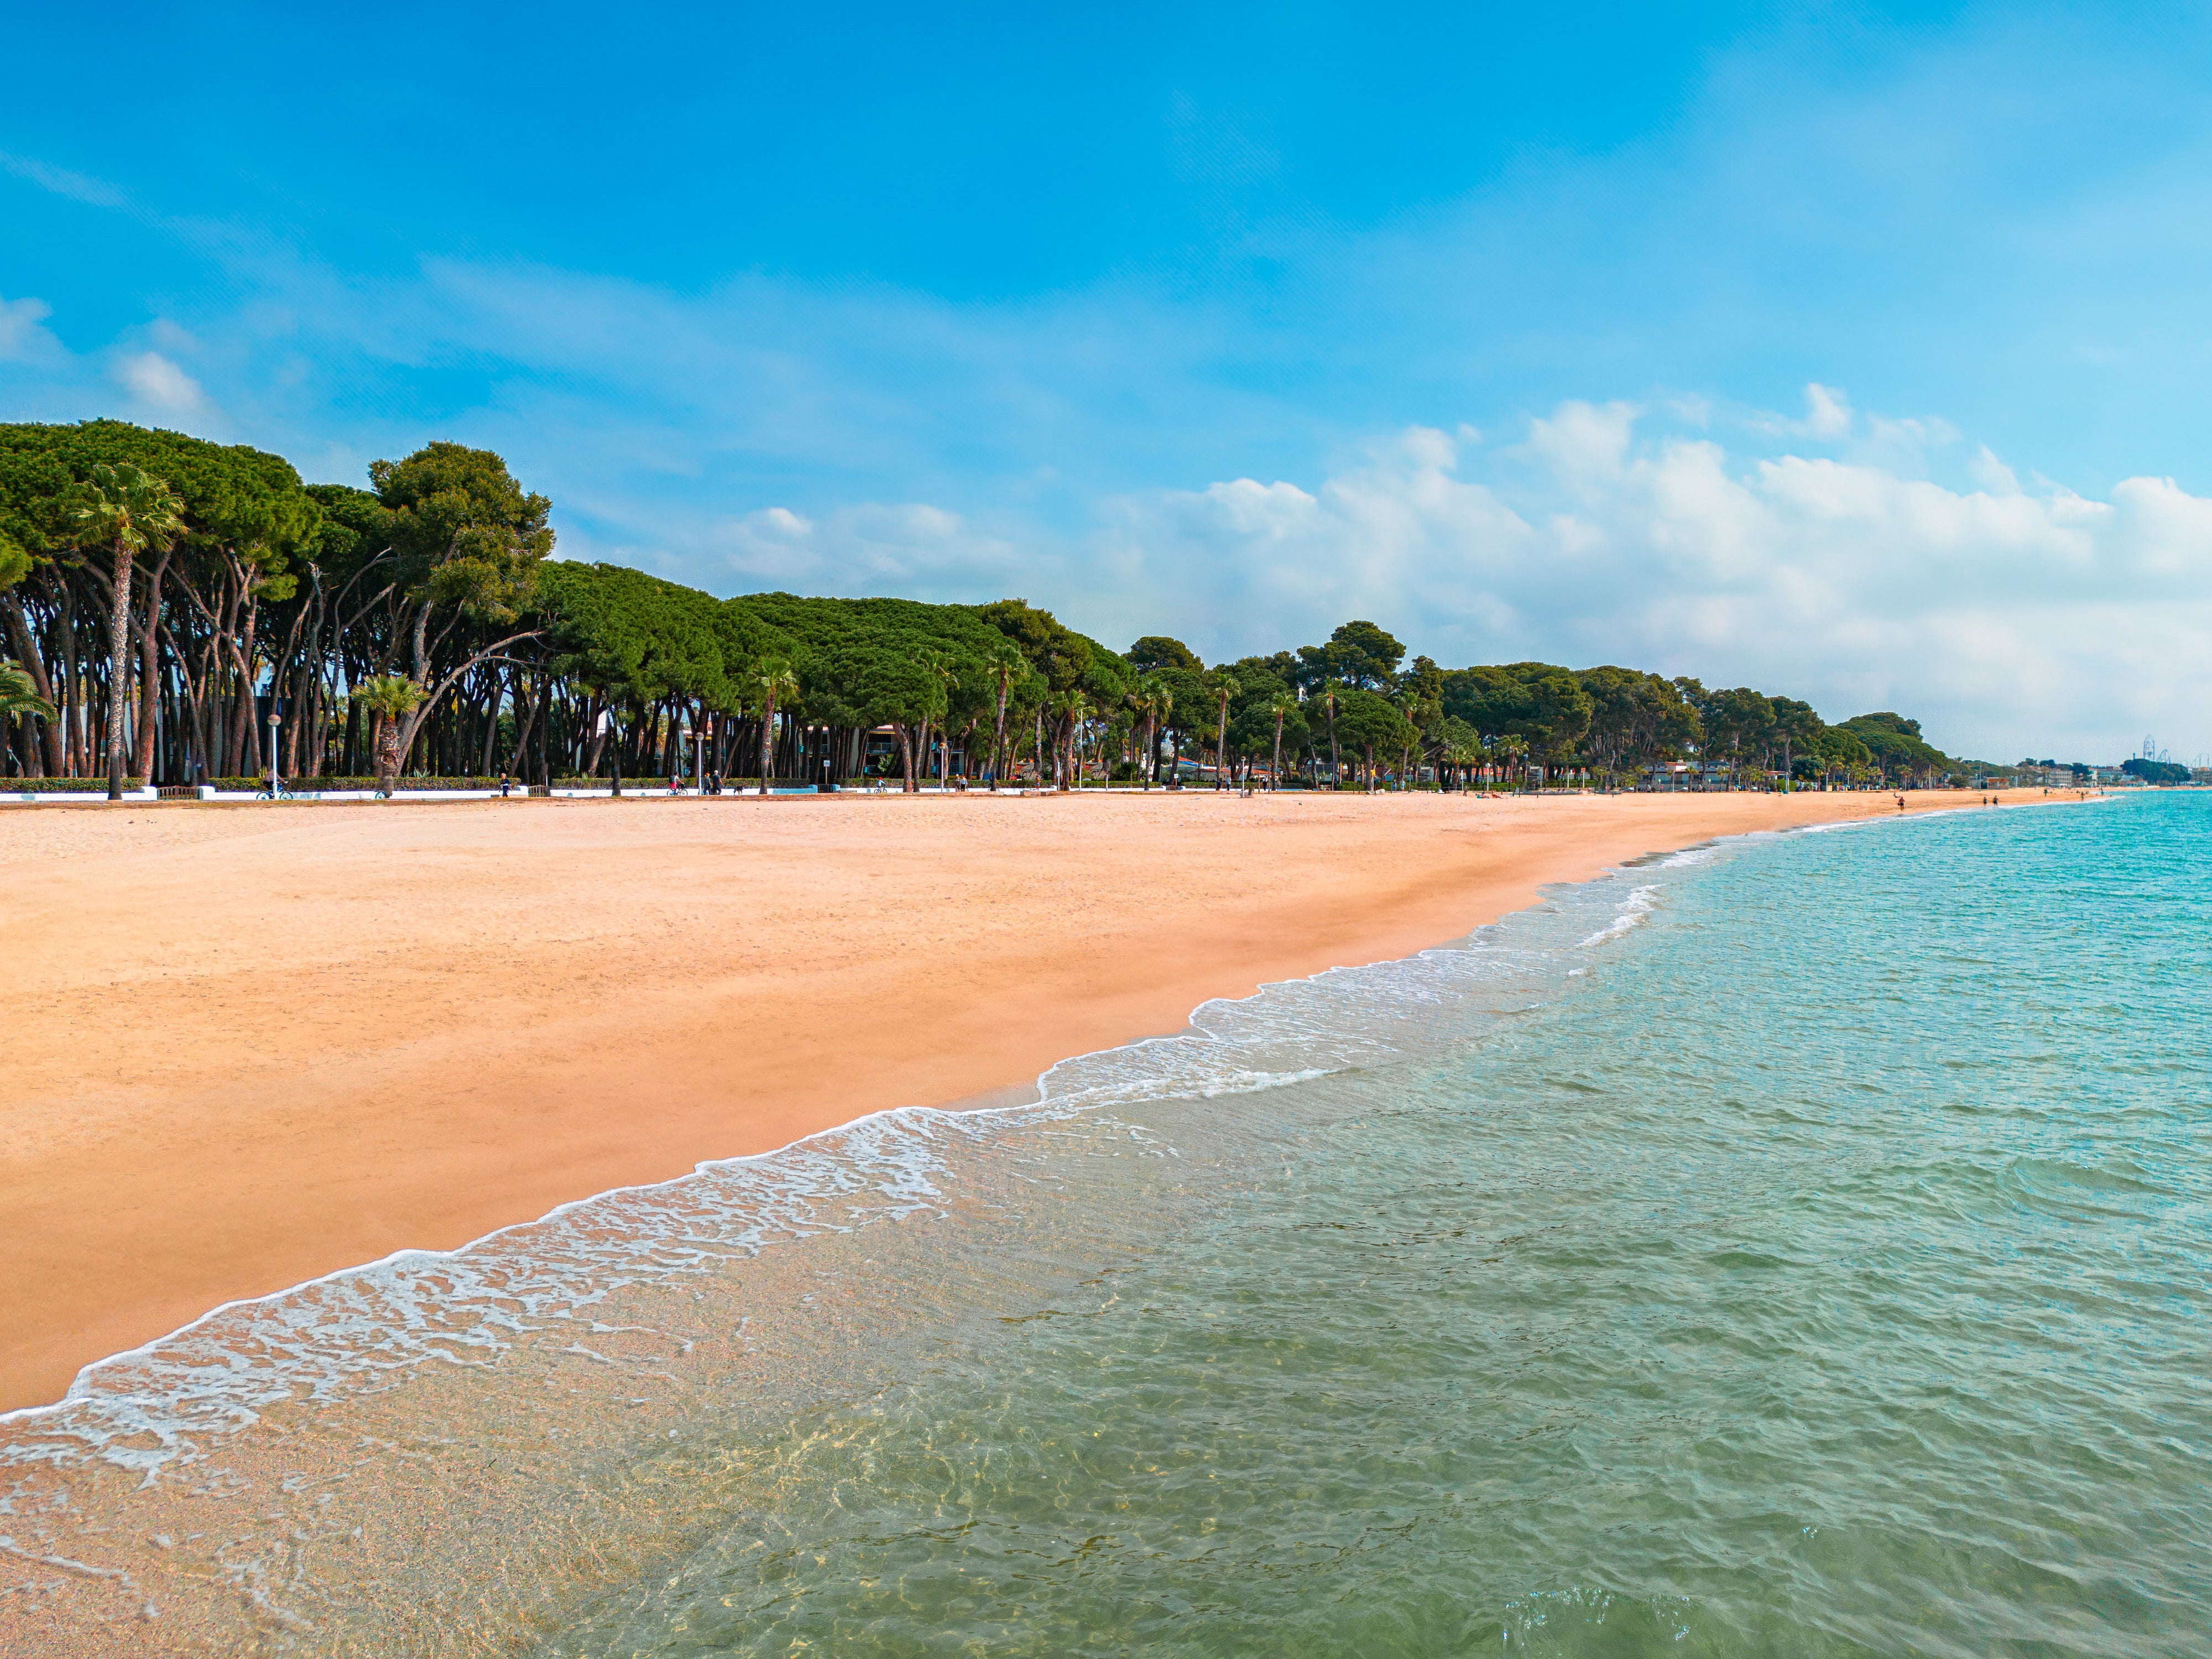 However you like your beach break, you’ll find the perfect spot for you along the picture postcard Costa Dorada